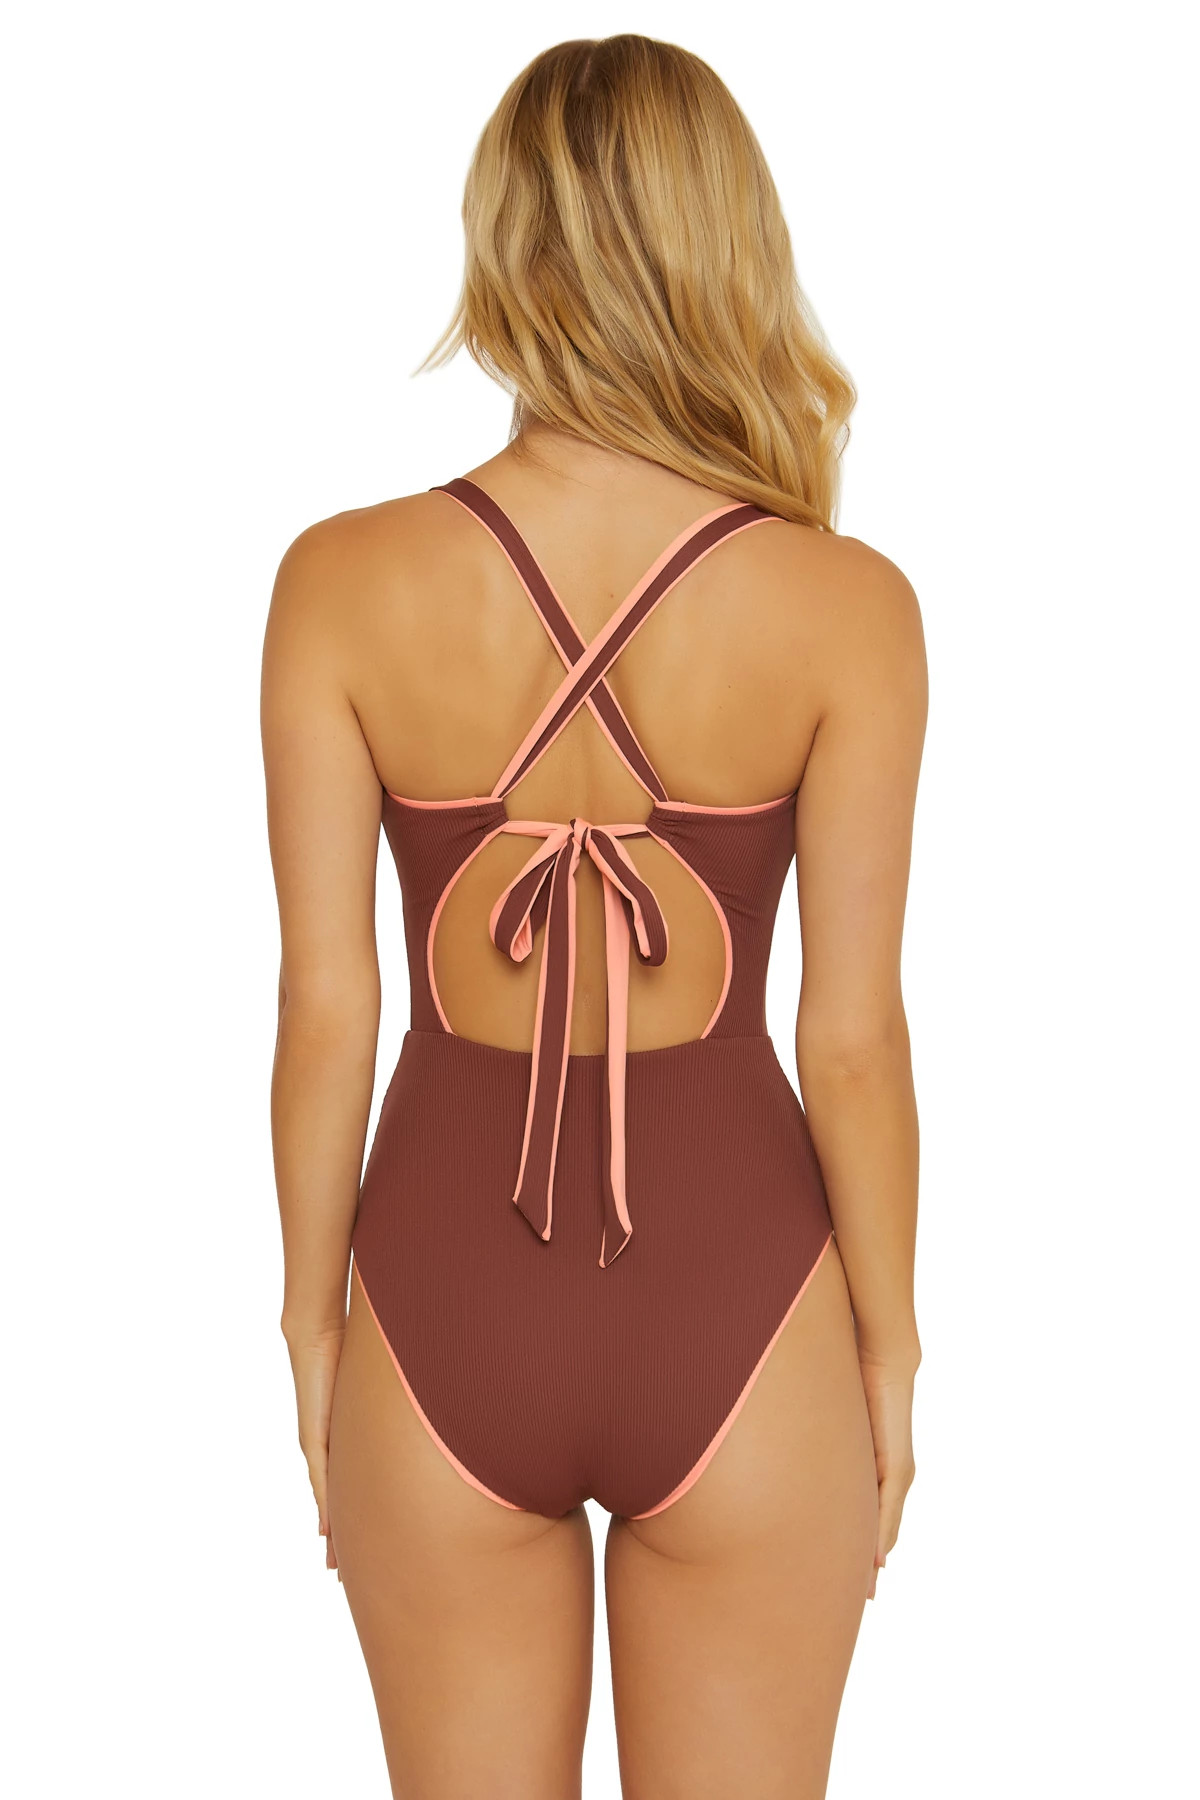 COCONUT Kylam One Piece Swimsuit image number 2